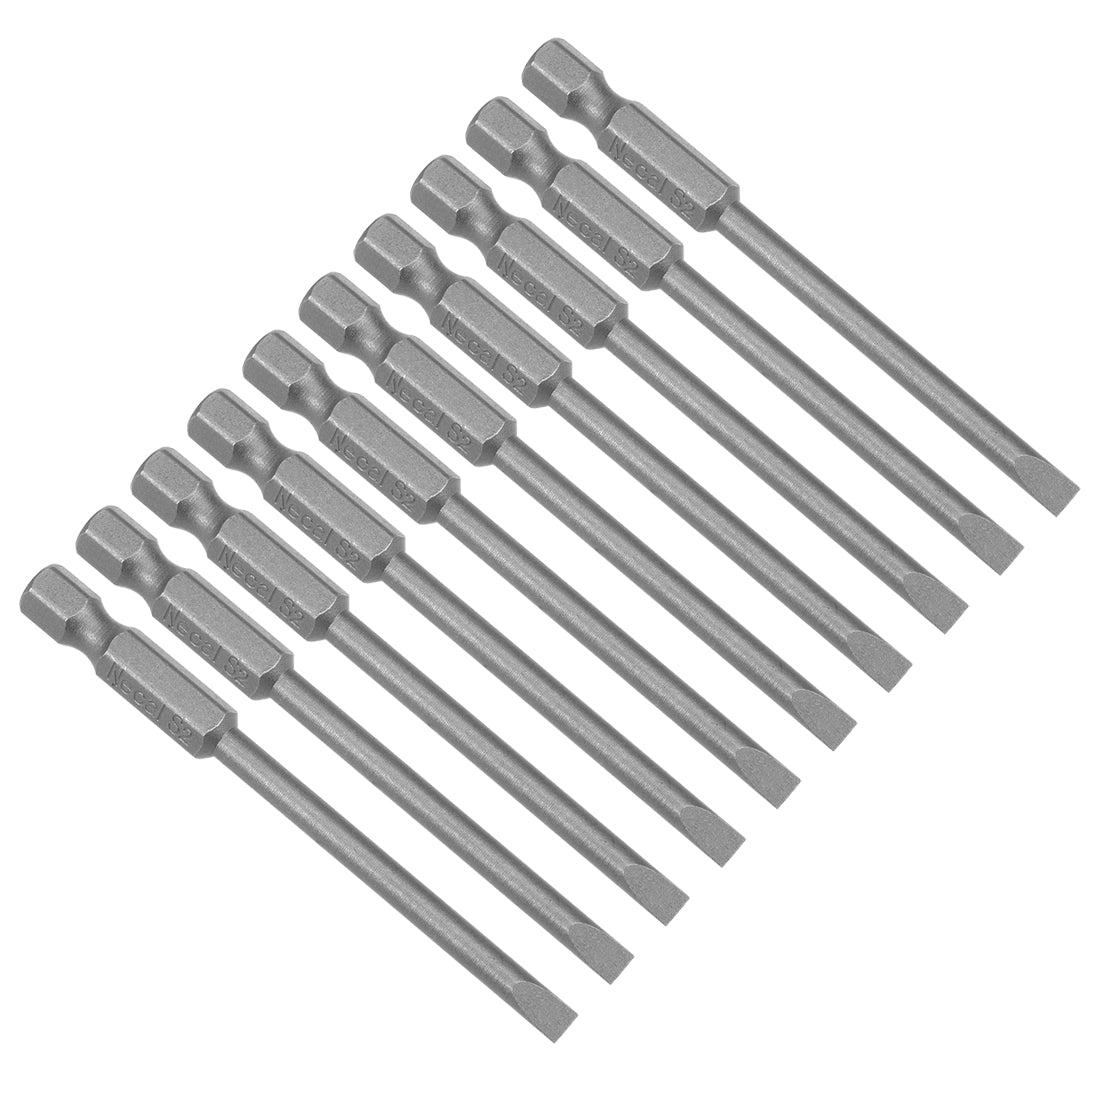 uxcell Uxcell 10Pcs 1/4" Hex Shank 75mm Length Magnetic SL4 Slot Head Screwdriver Bits S2 Alloy Steel